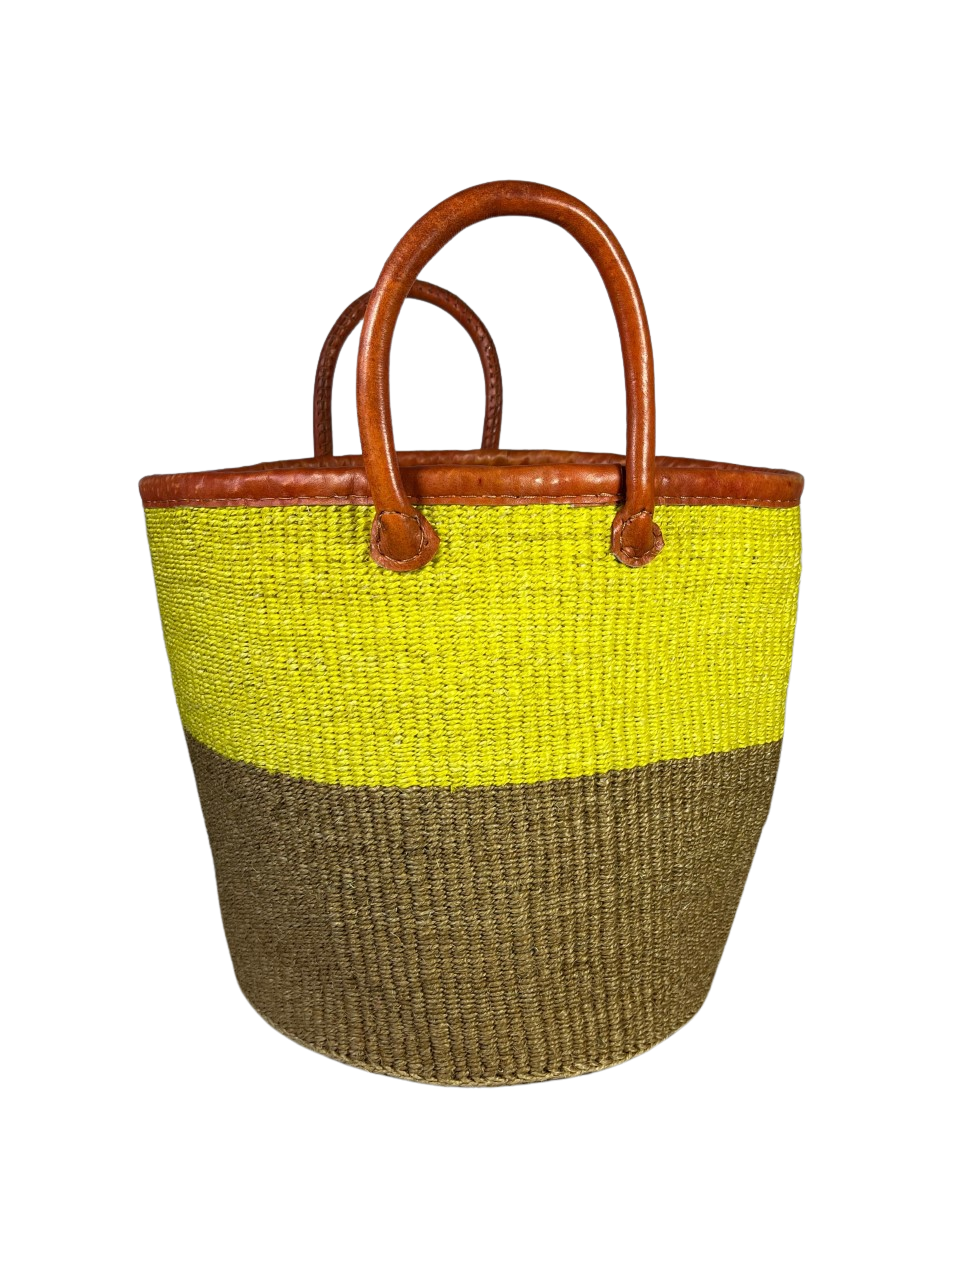 Two Tone Yellow And Beige Basket